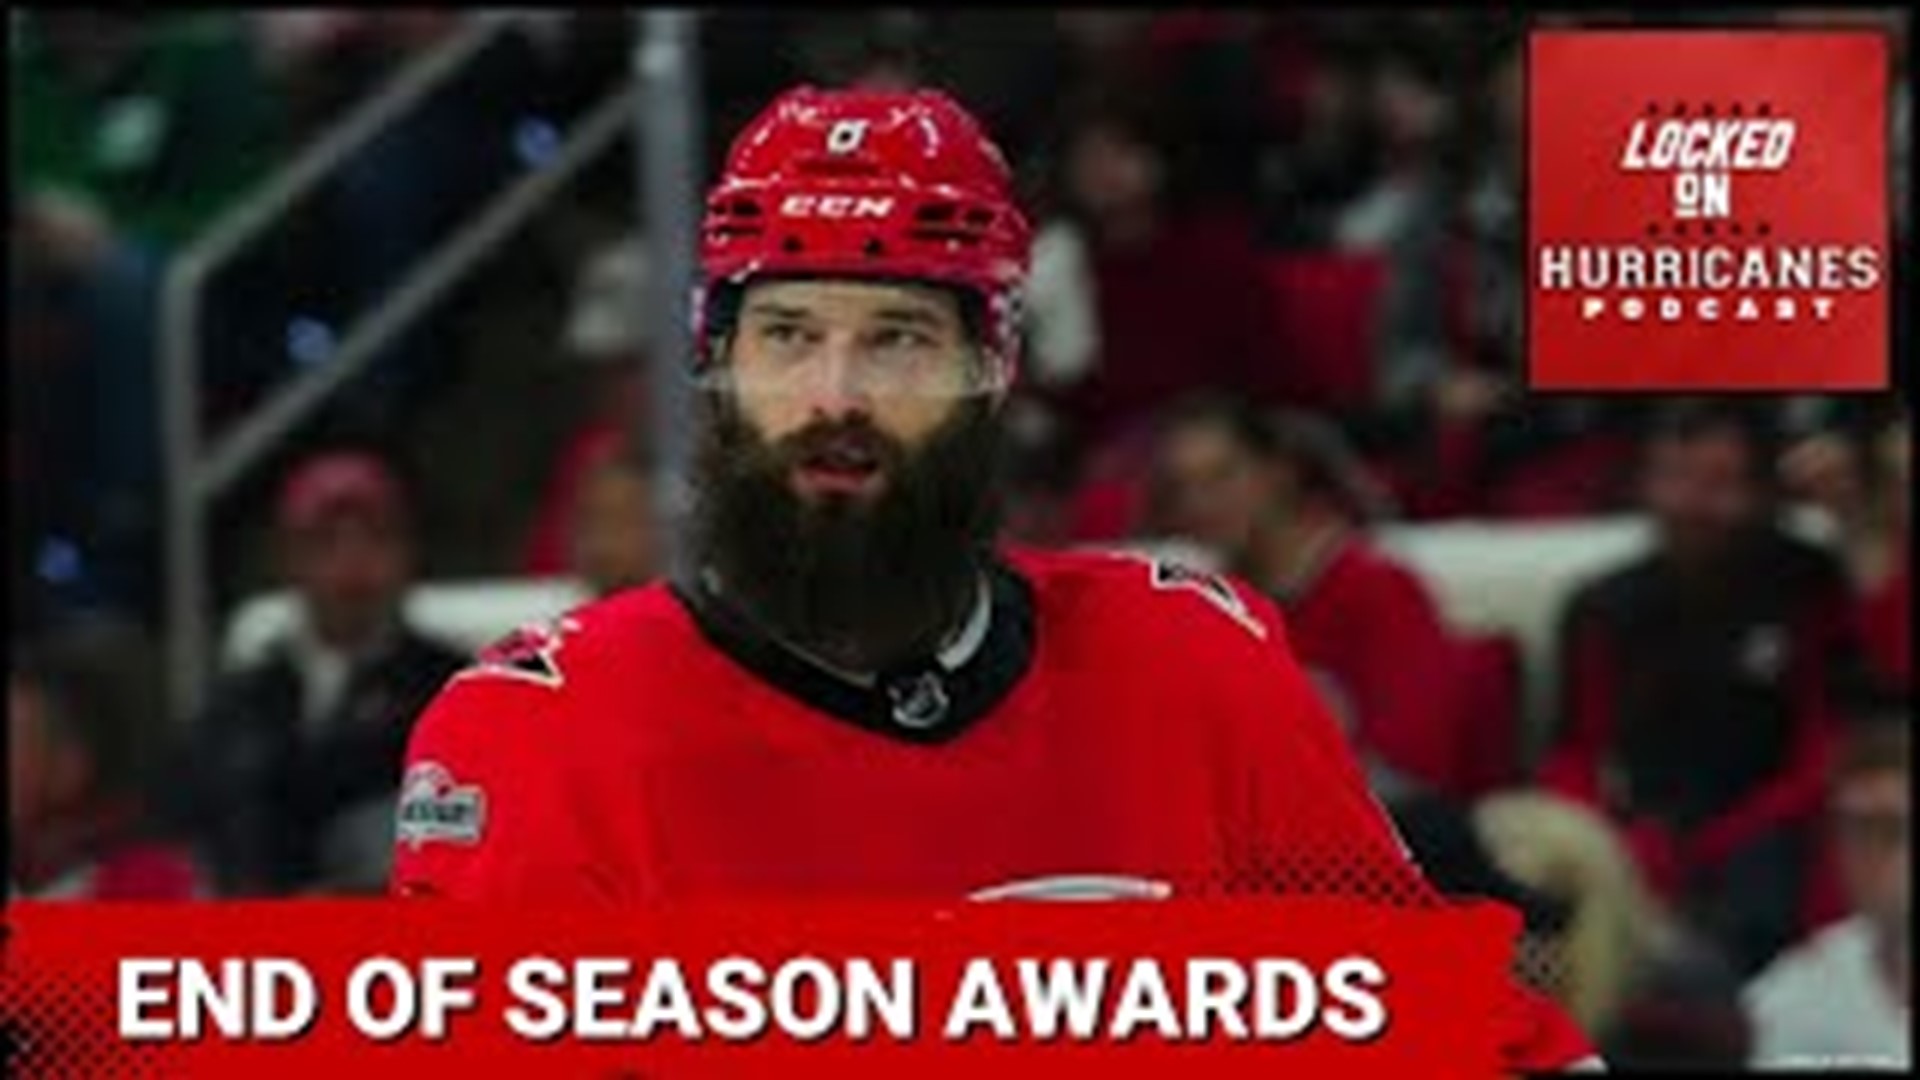 With the Carolina Hurricanes season now over, it's time to hand out awards. That and more on Locked On Hurricanes.